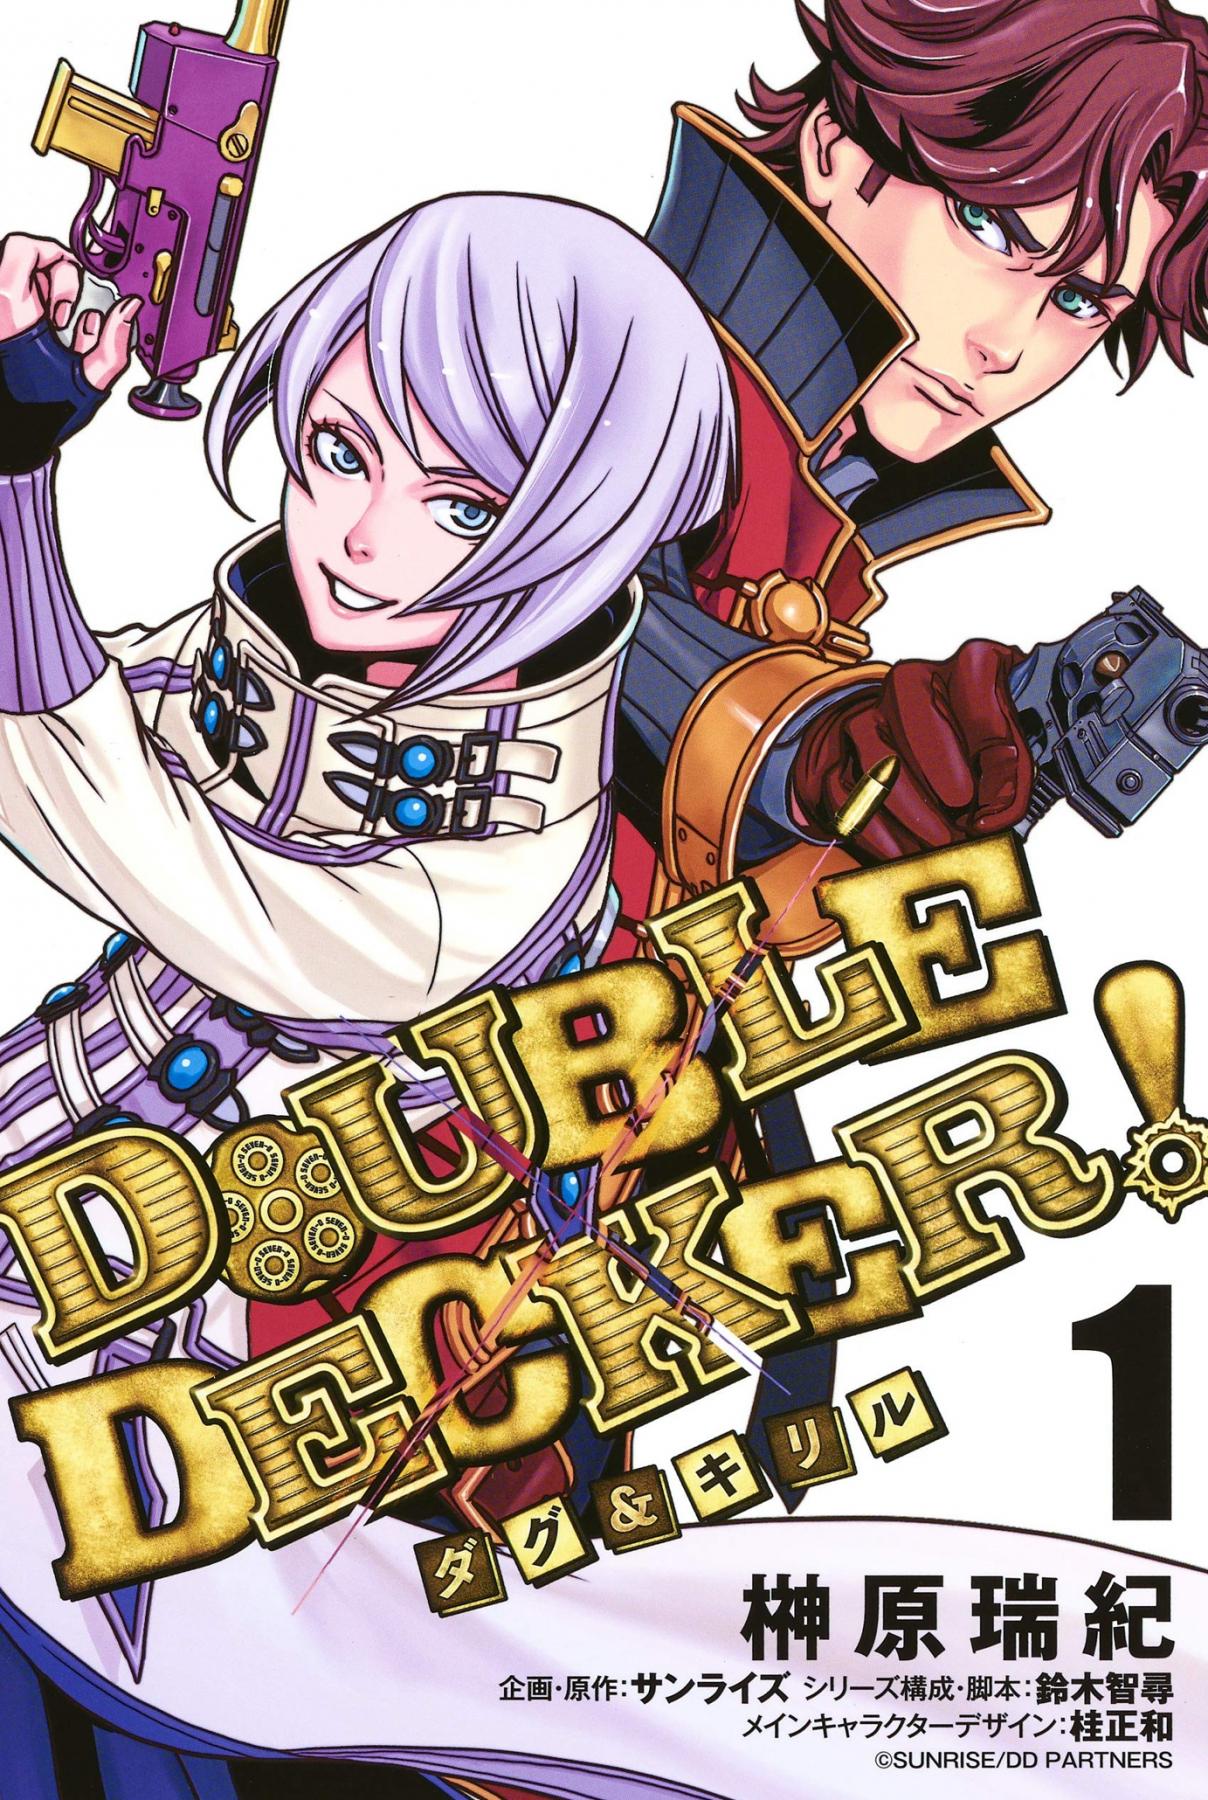 DOUBLE DECKER! Doug & Kirill Vol. 1 Ch. 1.1 Howl at the Two Suns!